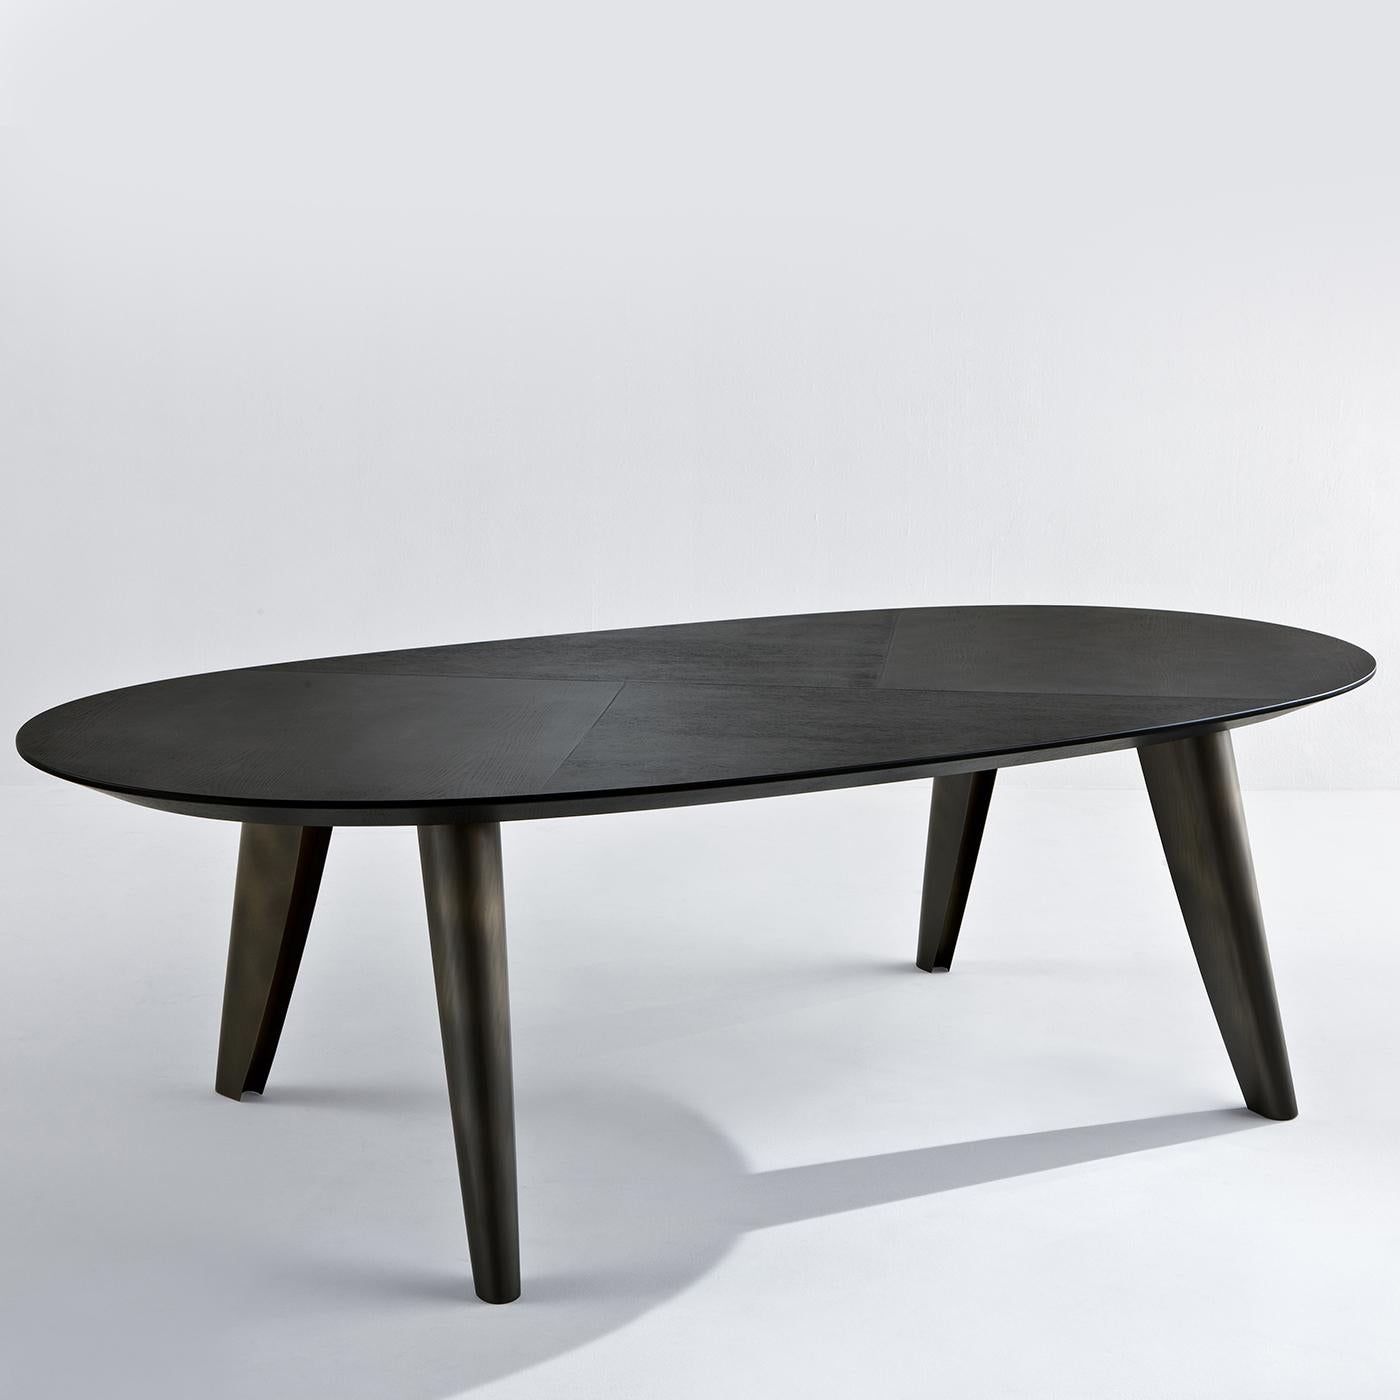 This oval-shaped dining table in dark stone oak wood is unique as it features a cross-grain pattern on the table top. The legs supporting the table are in dark brass with a tobacco finish and are set at a slight angle. A beautiful table for those in